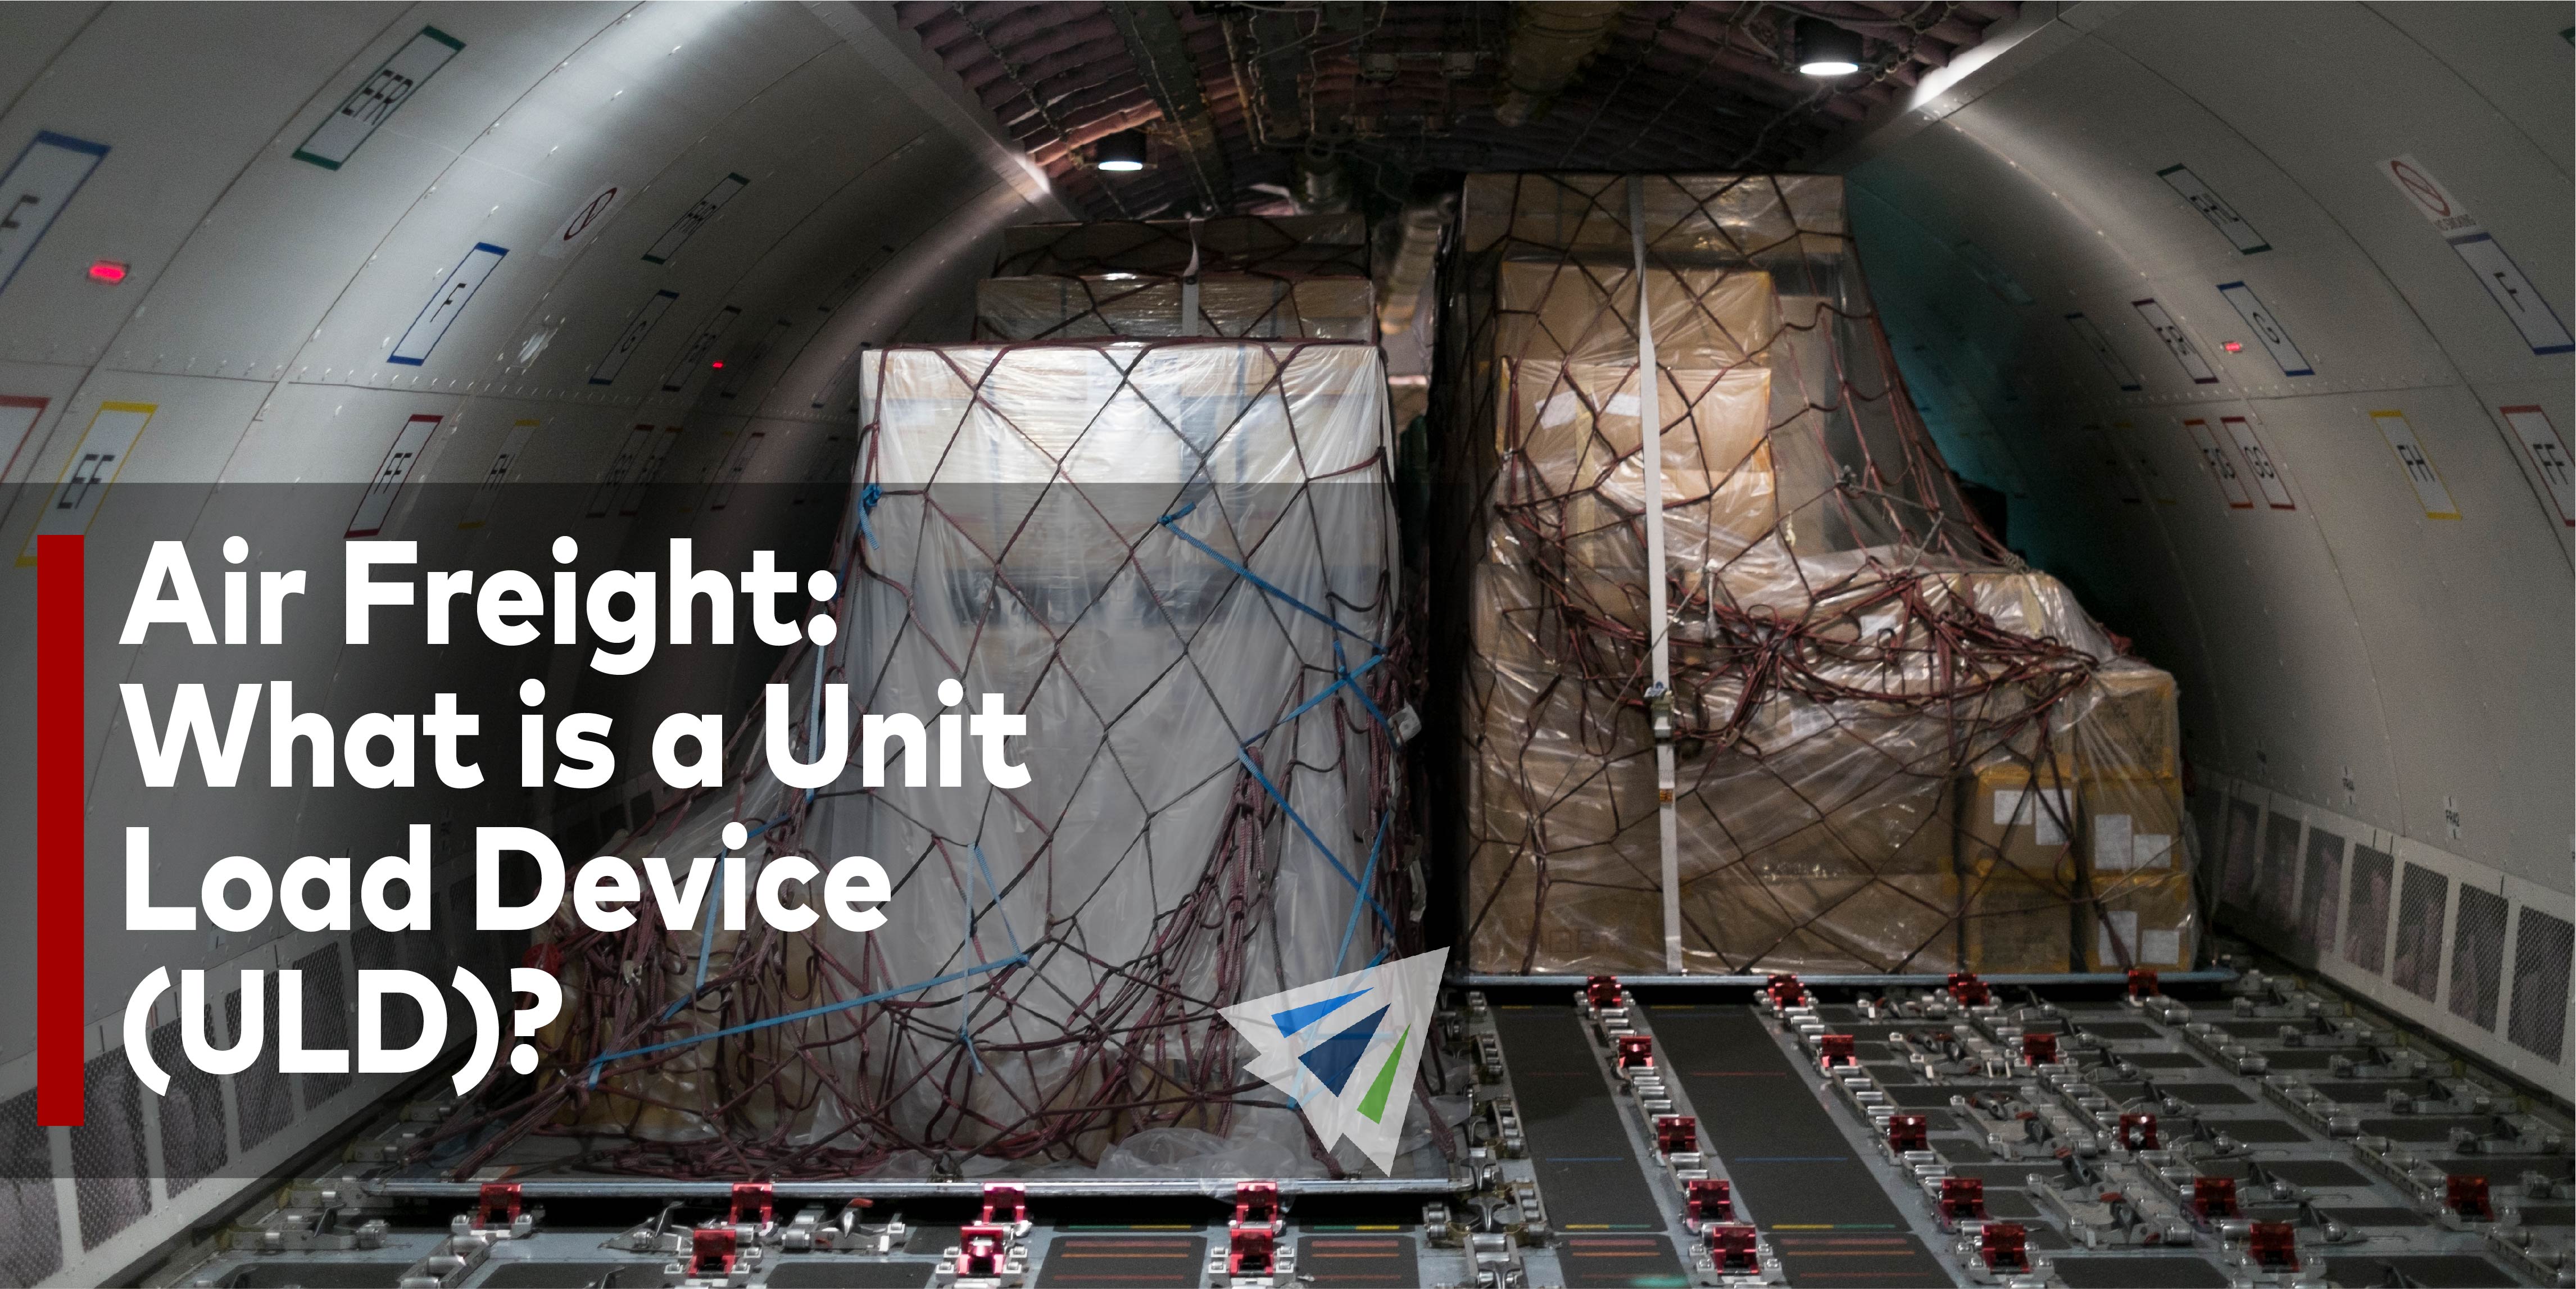 Air Freight- What is a Unit Load Device (ULD)